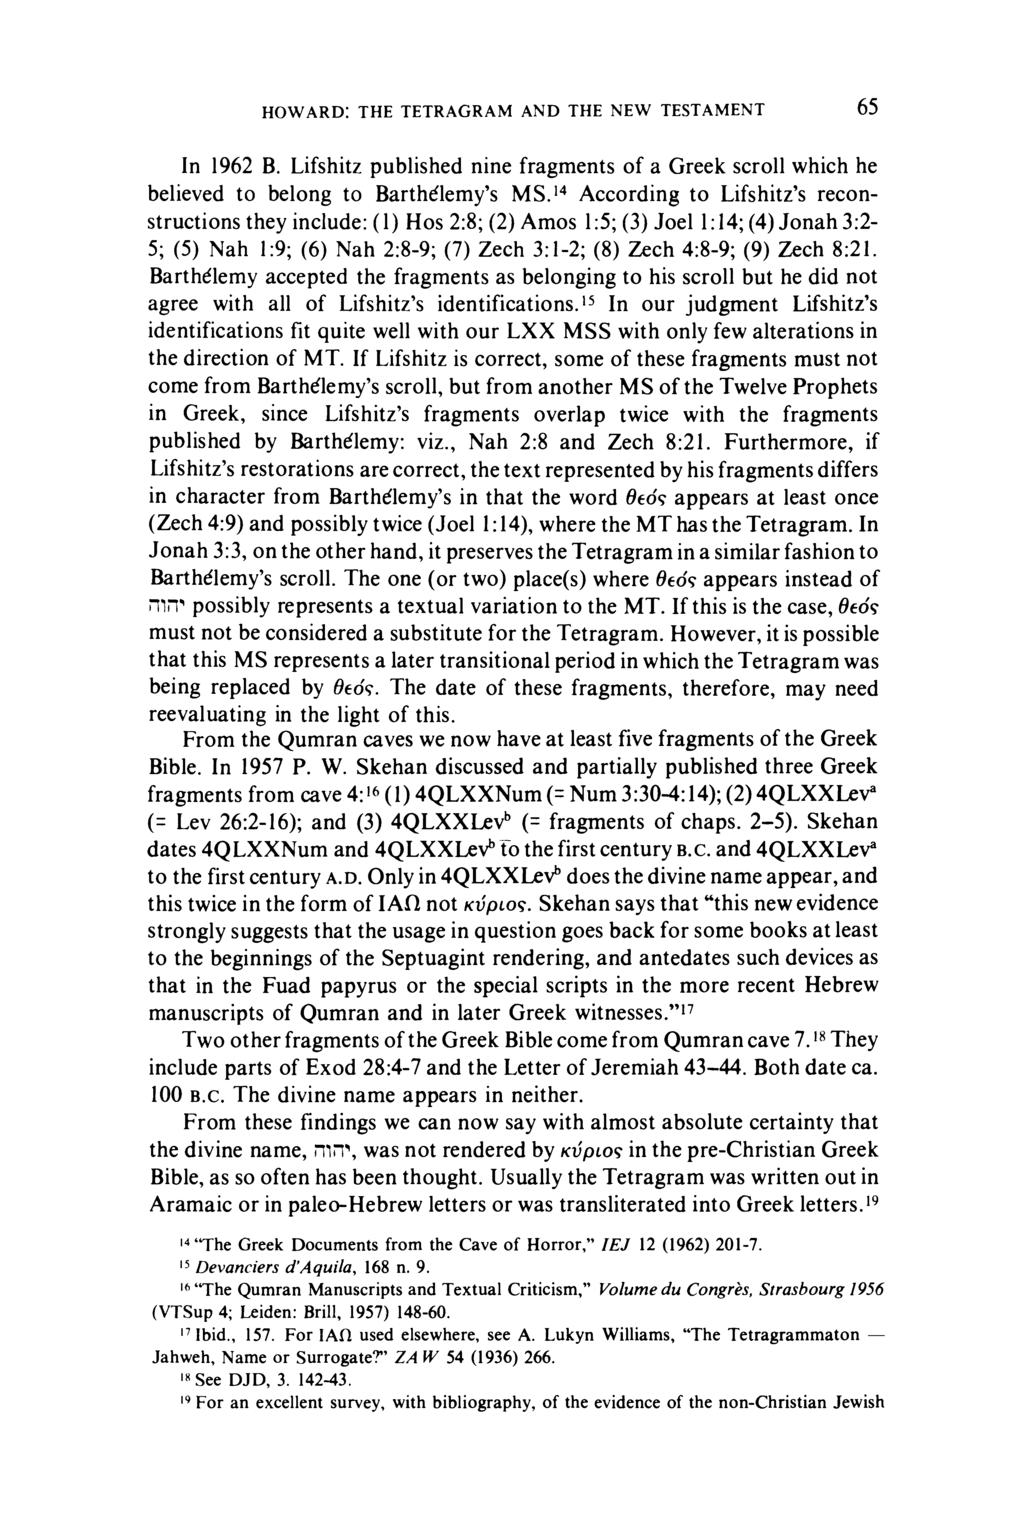 HOWARD: THE TETRAGRAM AND THE NEW TESTAMENT 65 In 1962 B. Lifshitz published nine fragments of a Greek scroll which he believed to belong to Barthdlemy's MS.